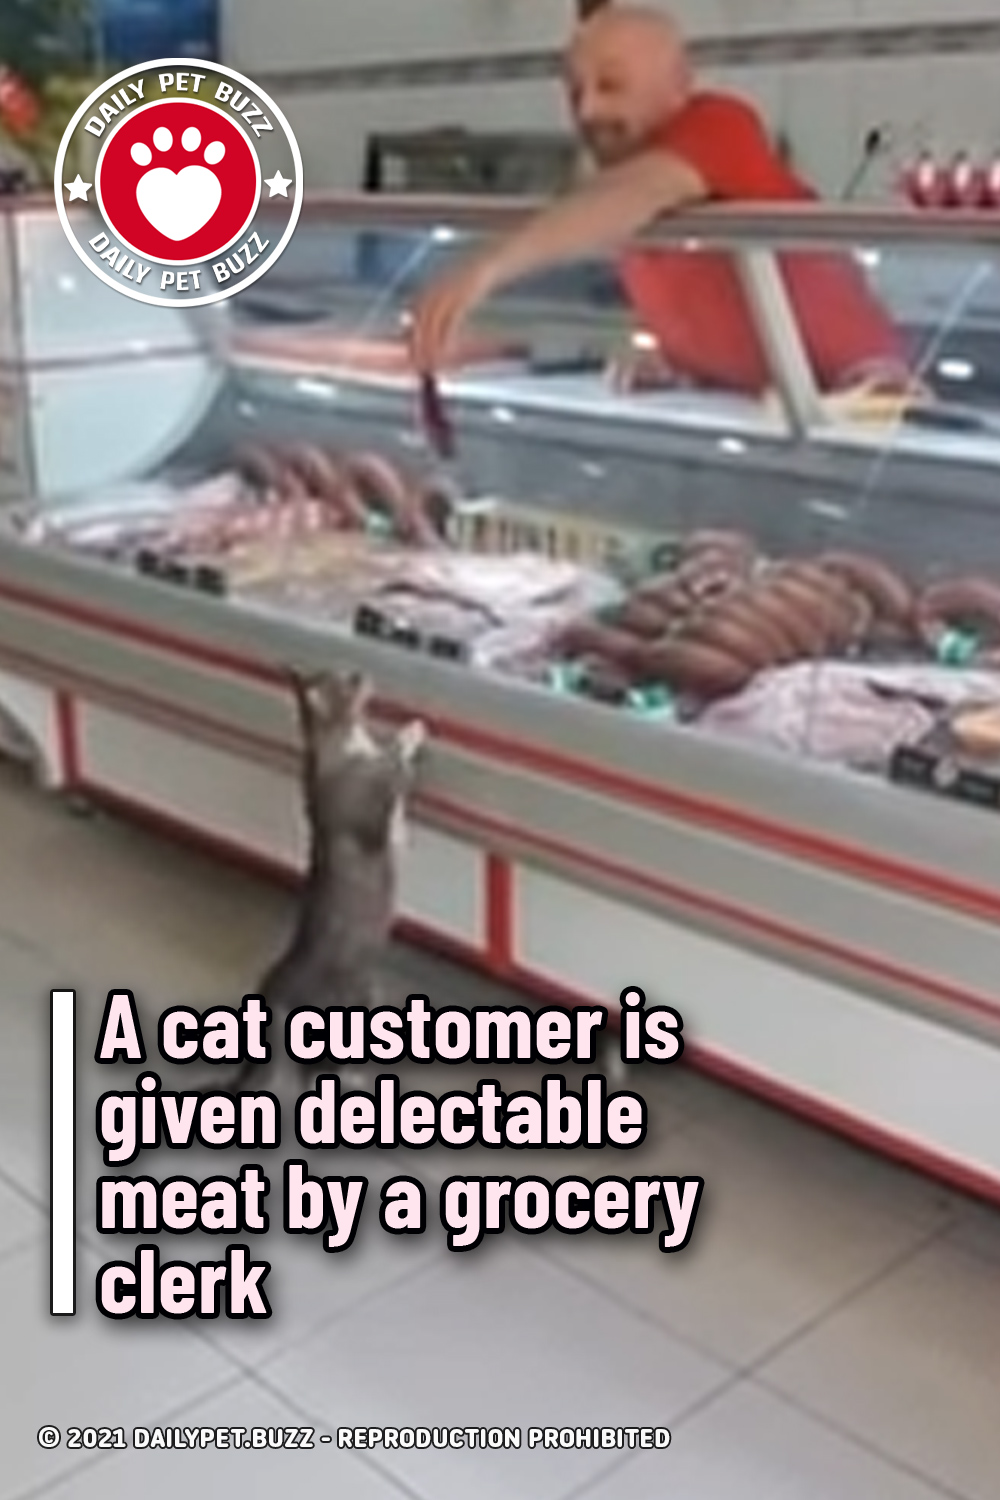 A cat customer is given delectable meat by a grocery clerk